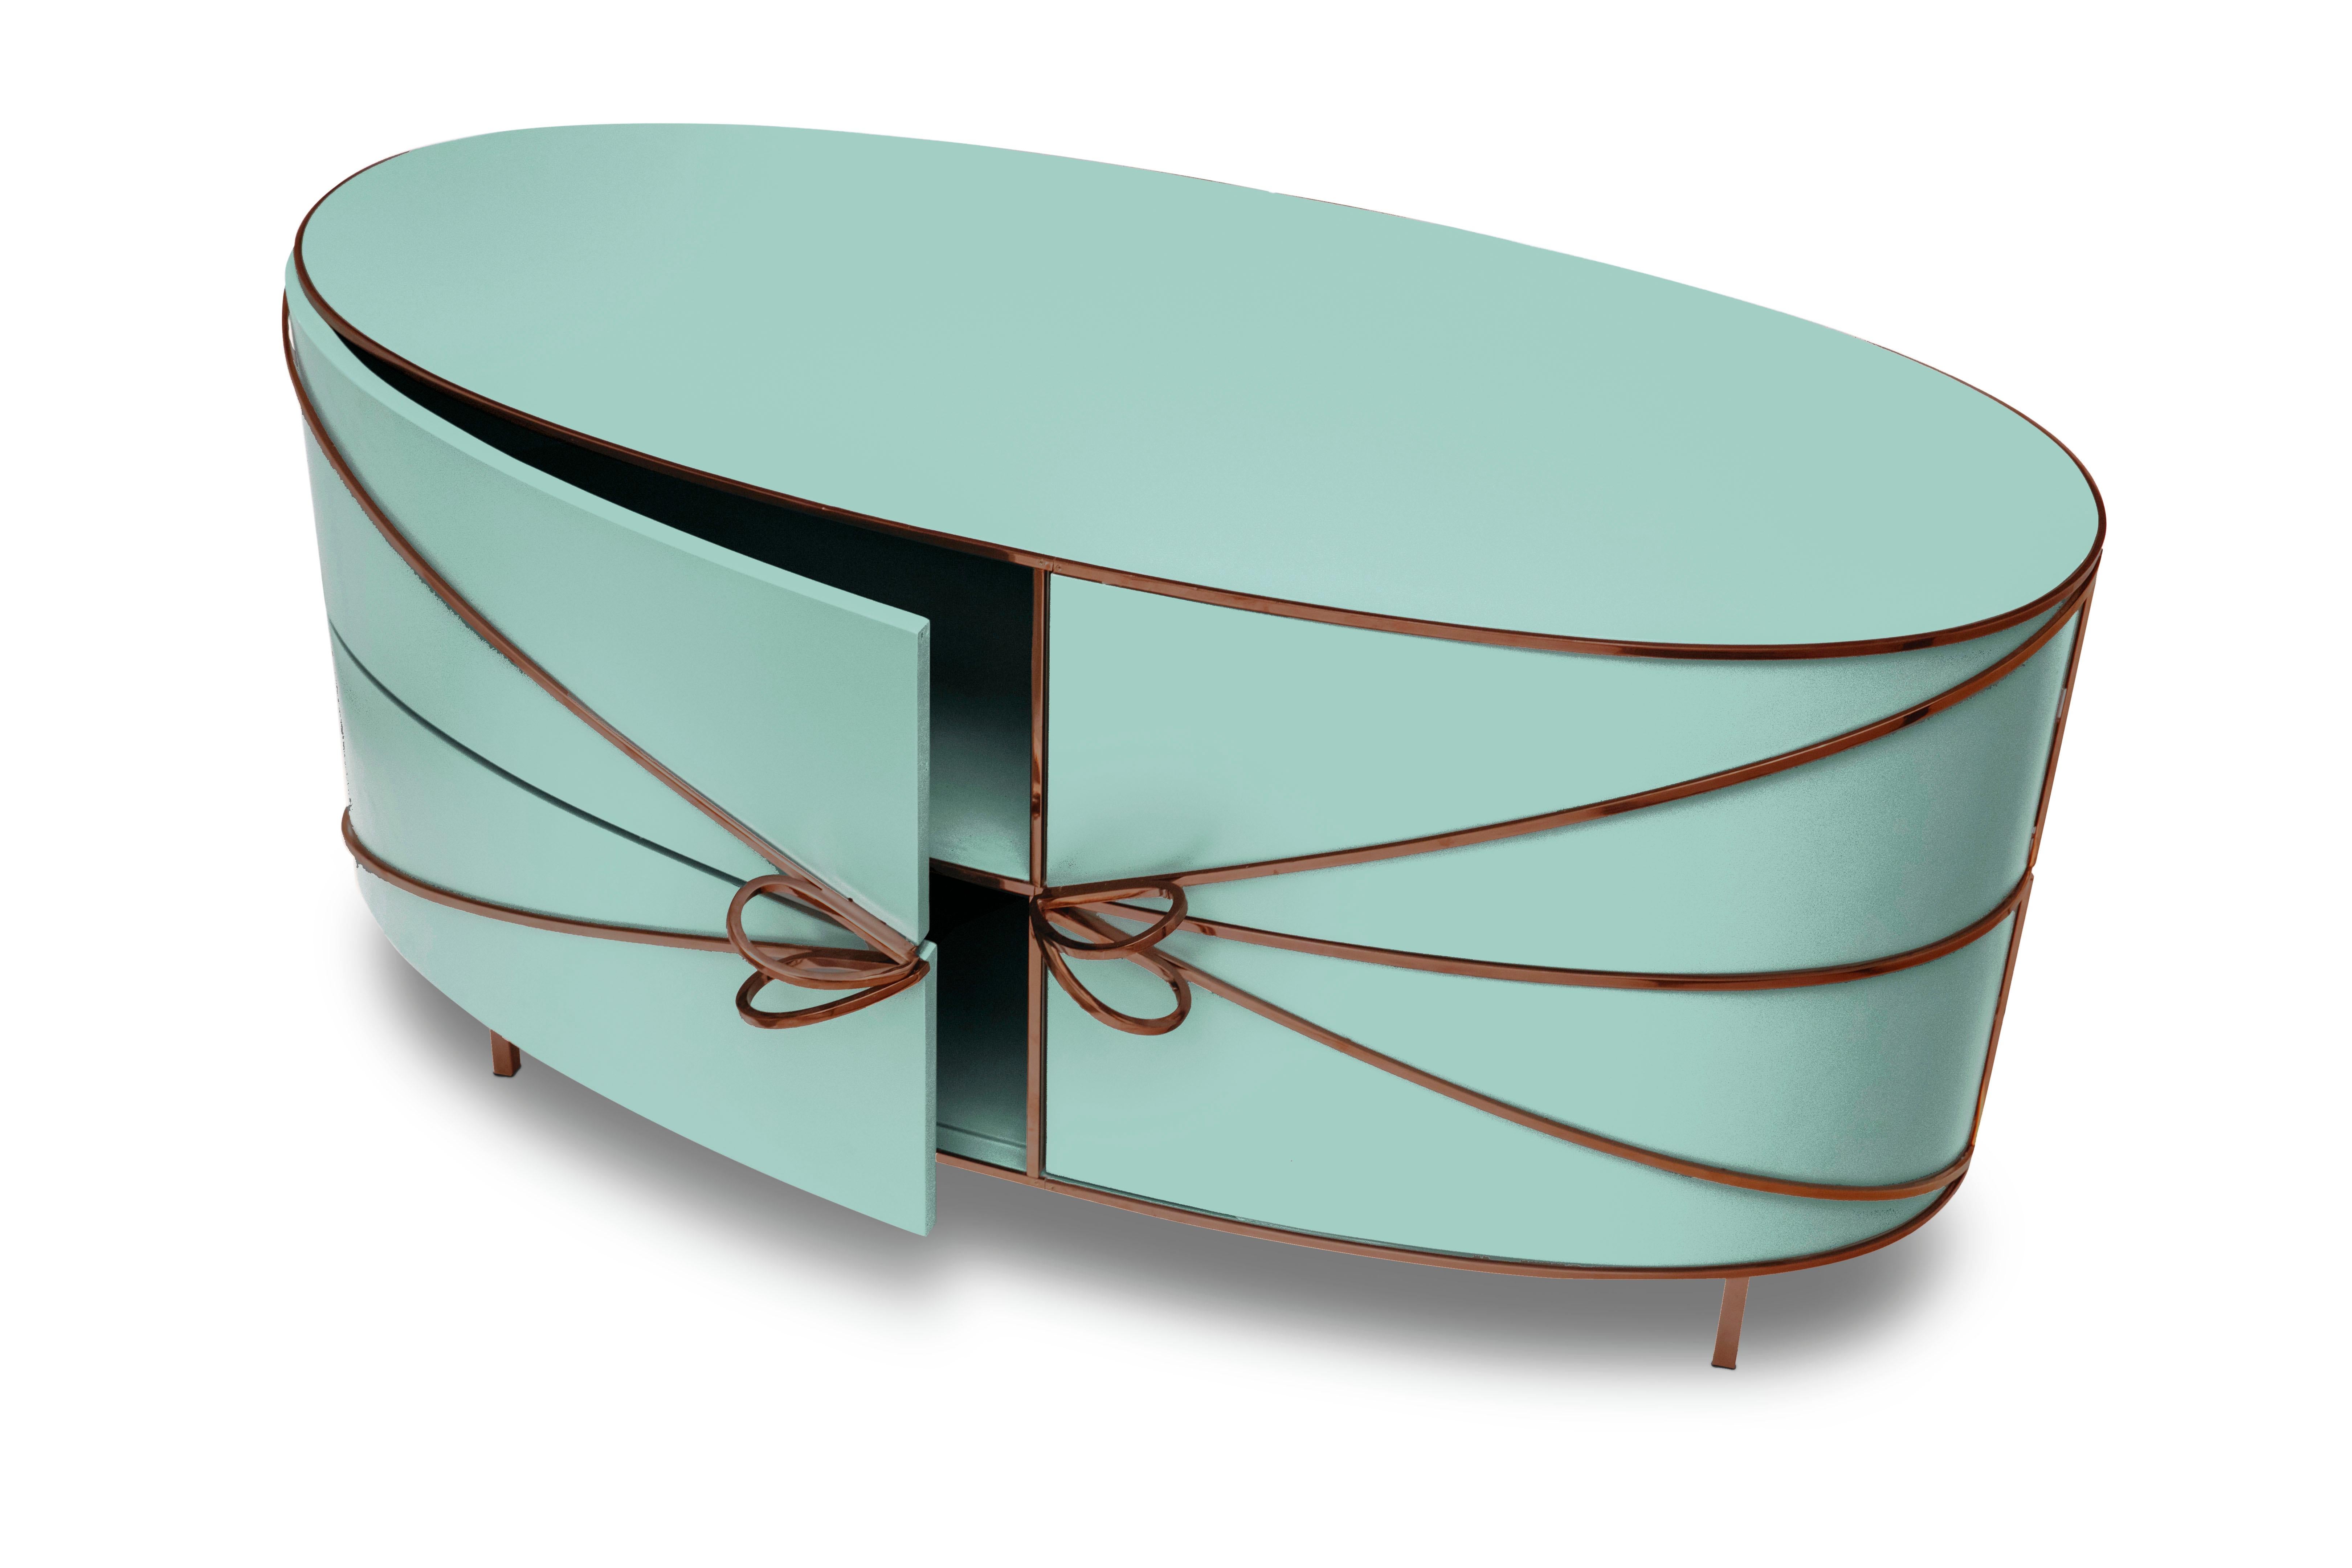 88 Secrets Mint Green Sideboard with Rose Gold Trims by Nika Zupanc is a mint green cabinet in sensuous, feminine lines with luxurious metal trims in rose gold. A statement piece in any interior space!

Nika Zupanc, a strikingly renowned Slovenian